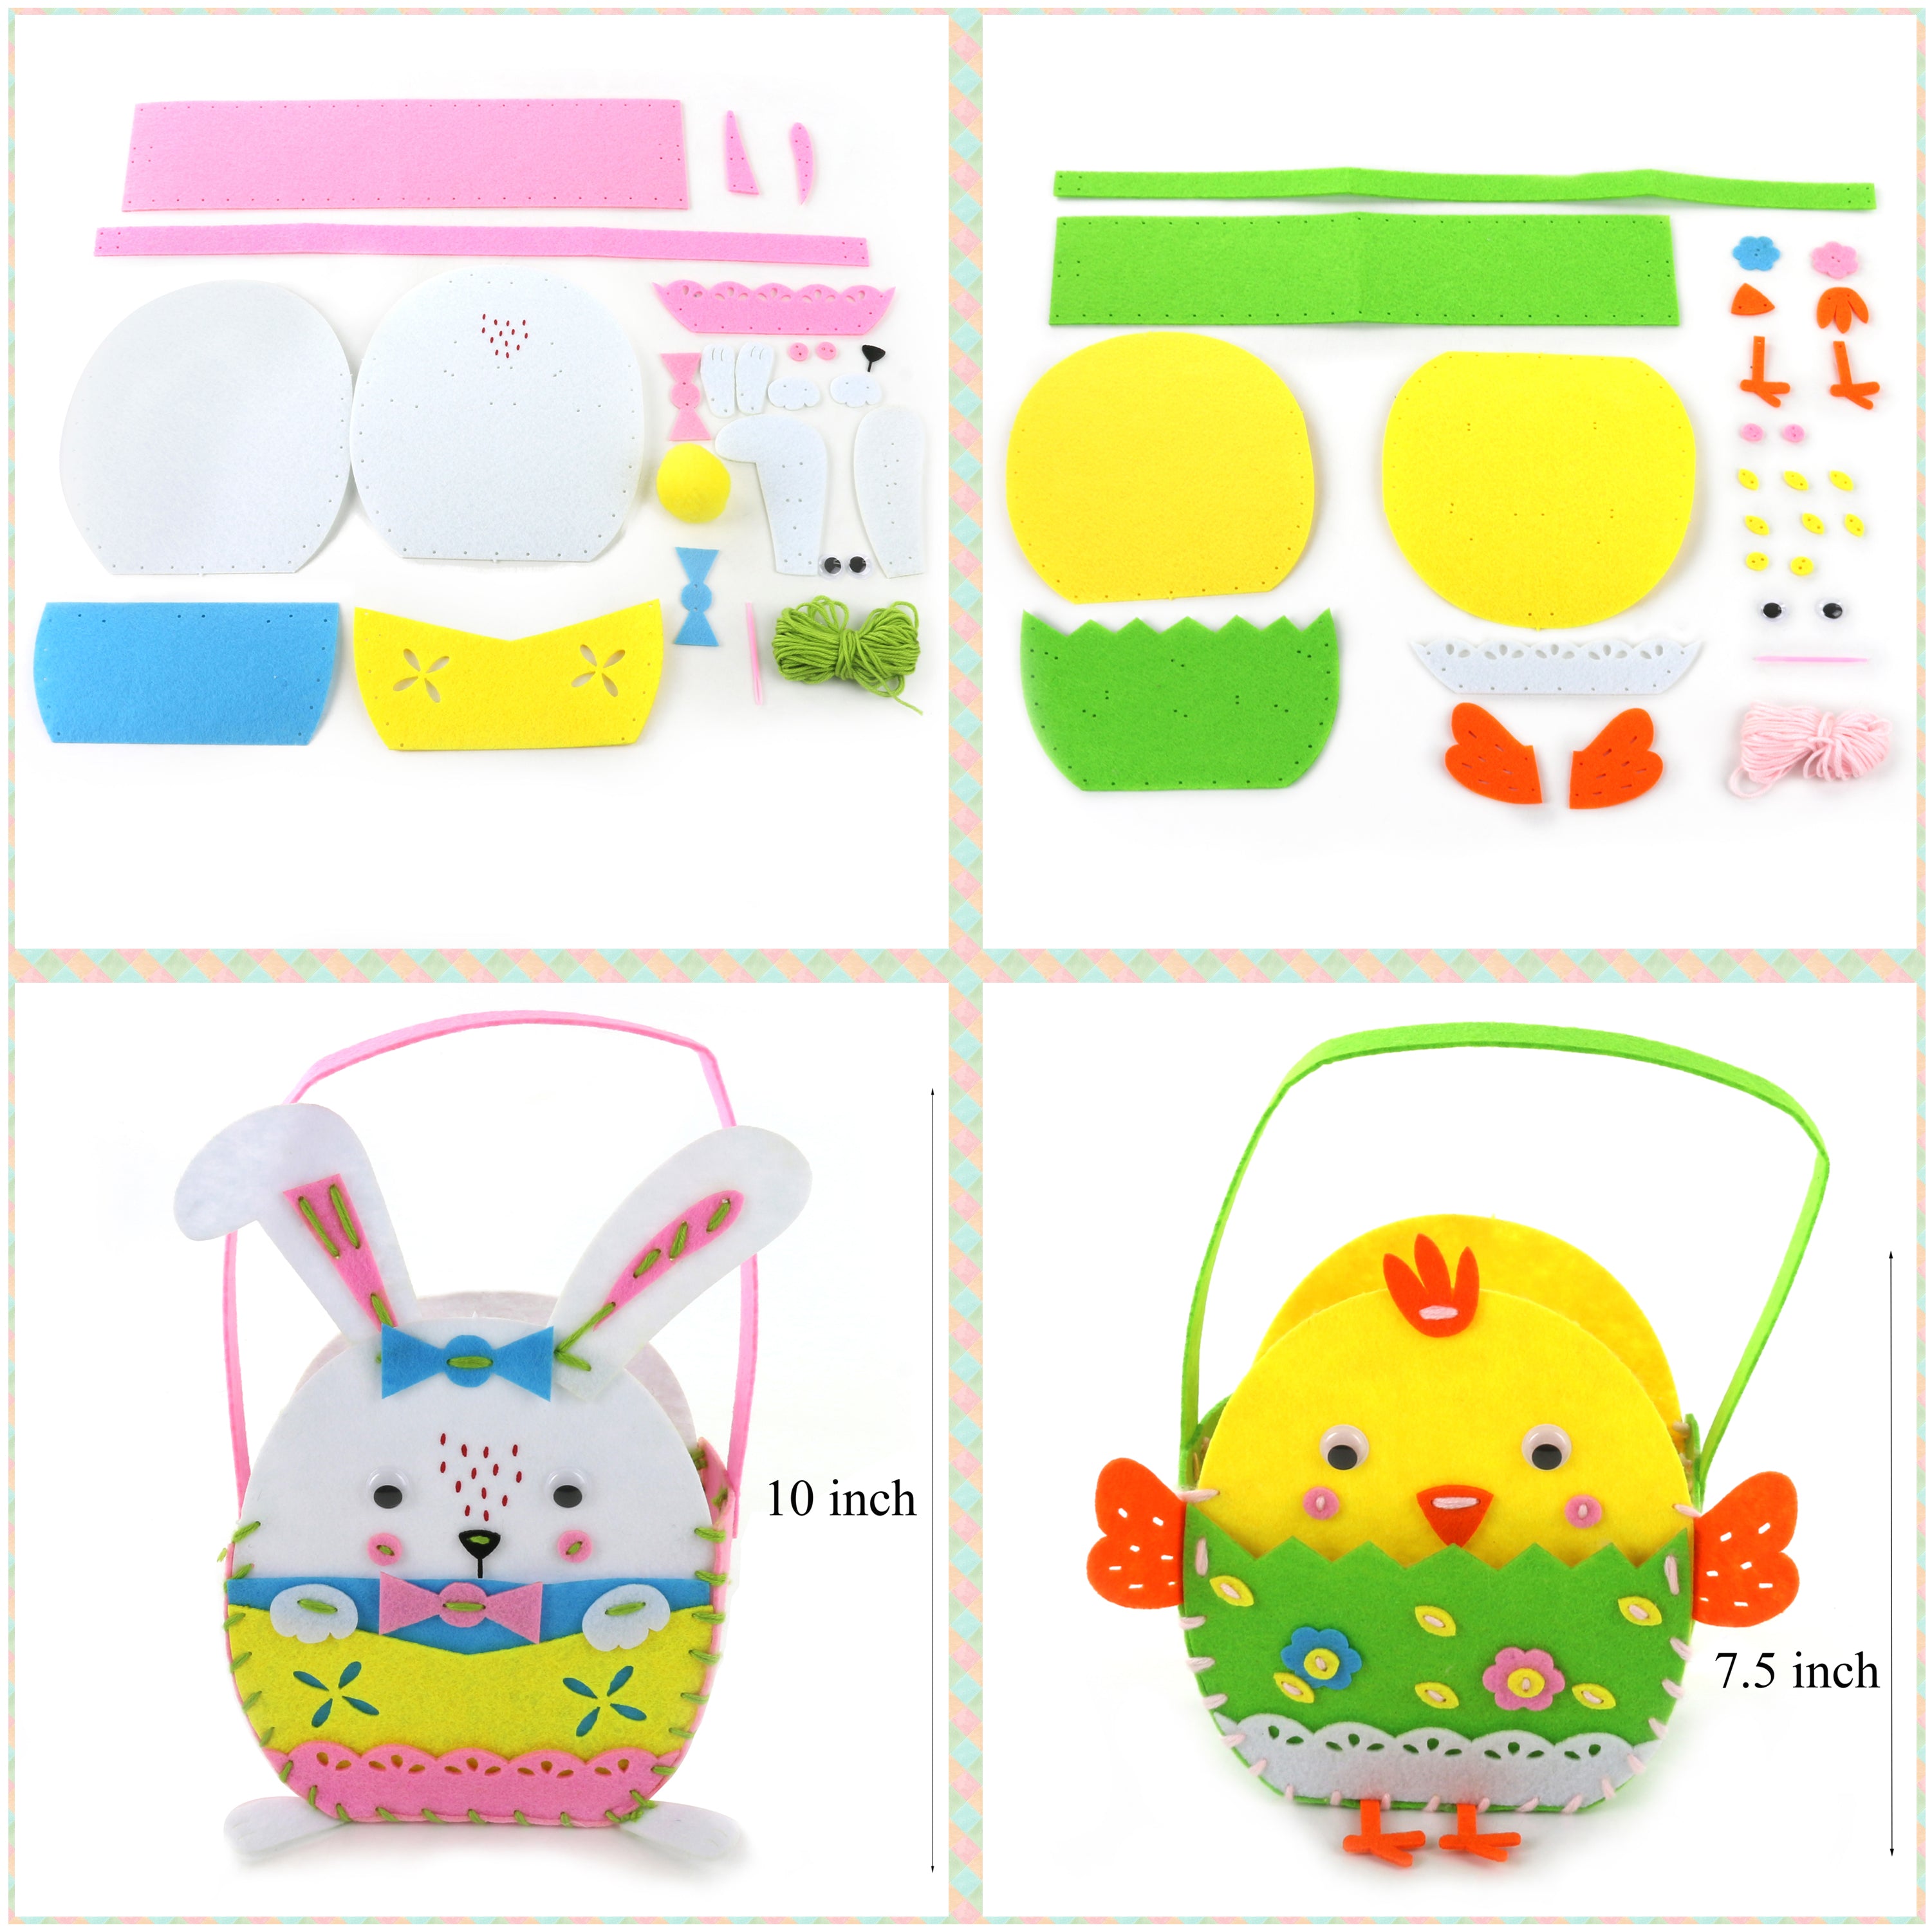 Easter sewing gifts diy egg hunt basket, bunny&chick | Bstaofy - Glow Guards